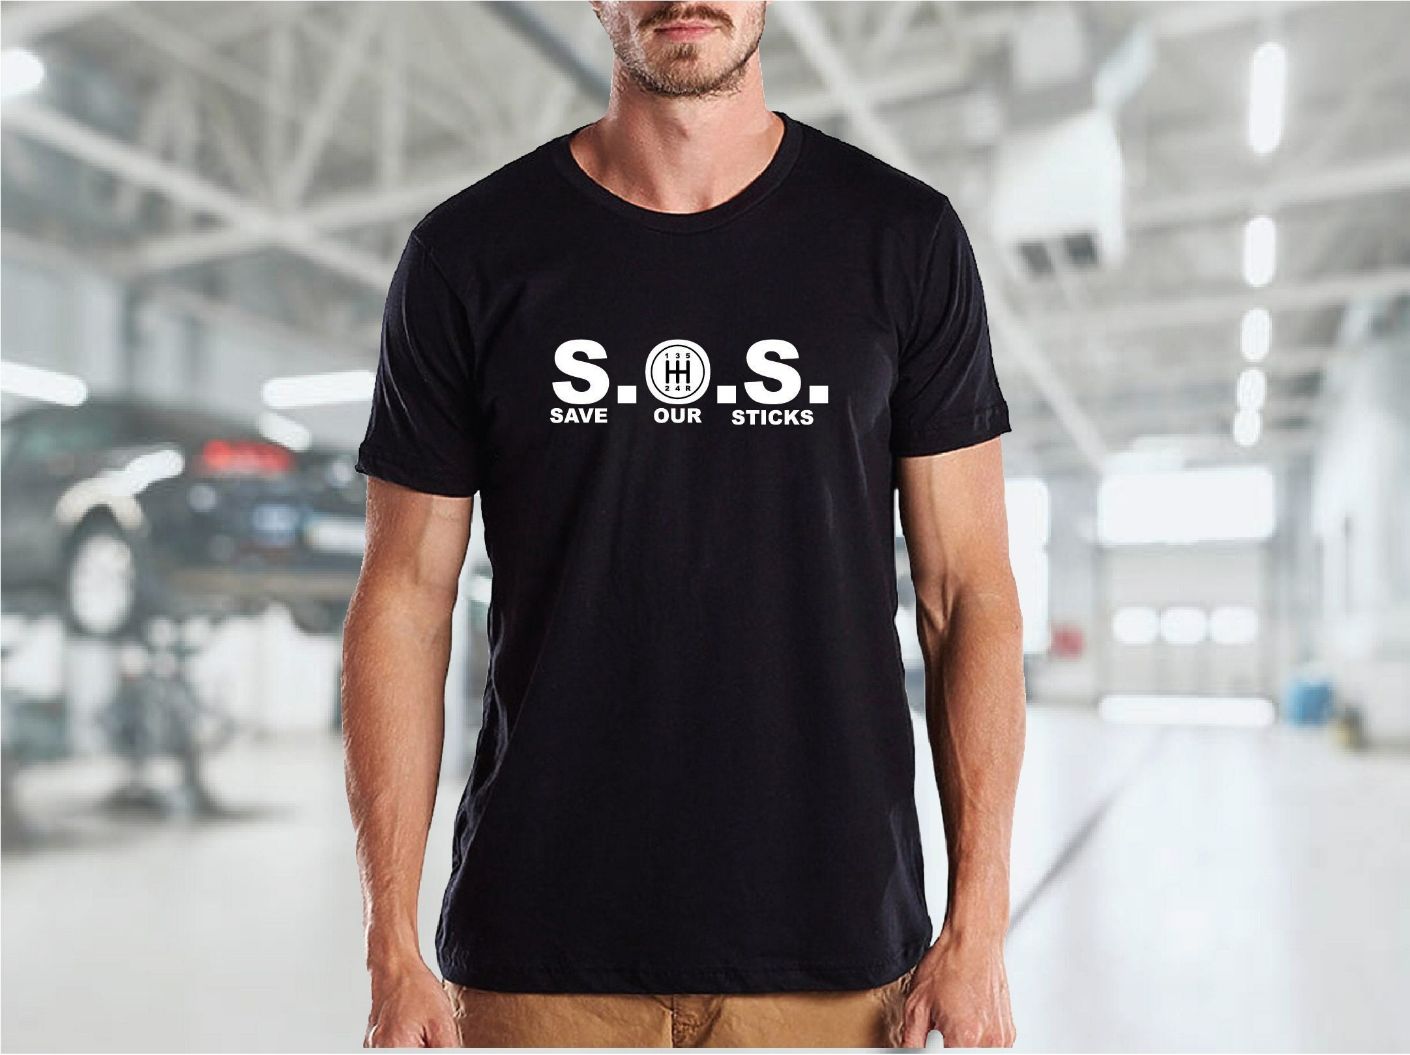 STICK SHIFT SOS Save Our Sticks Enthusiast TEE T-Shirt